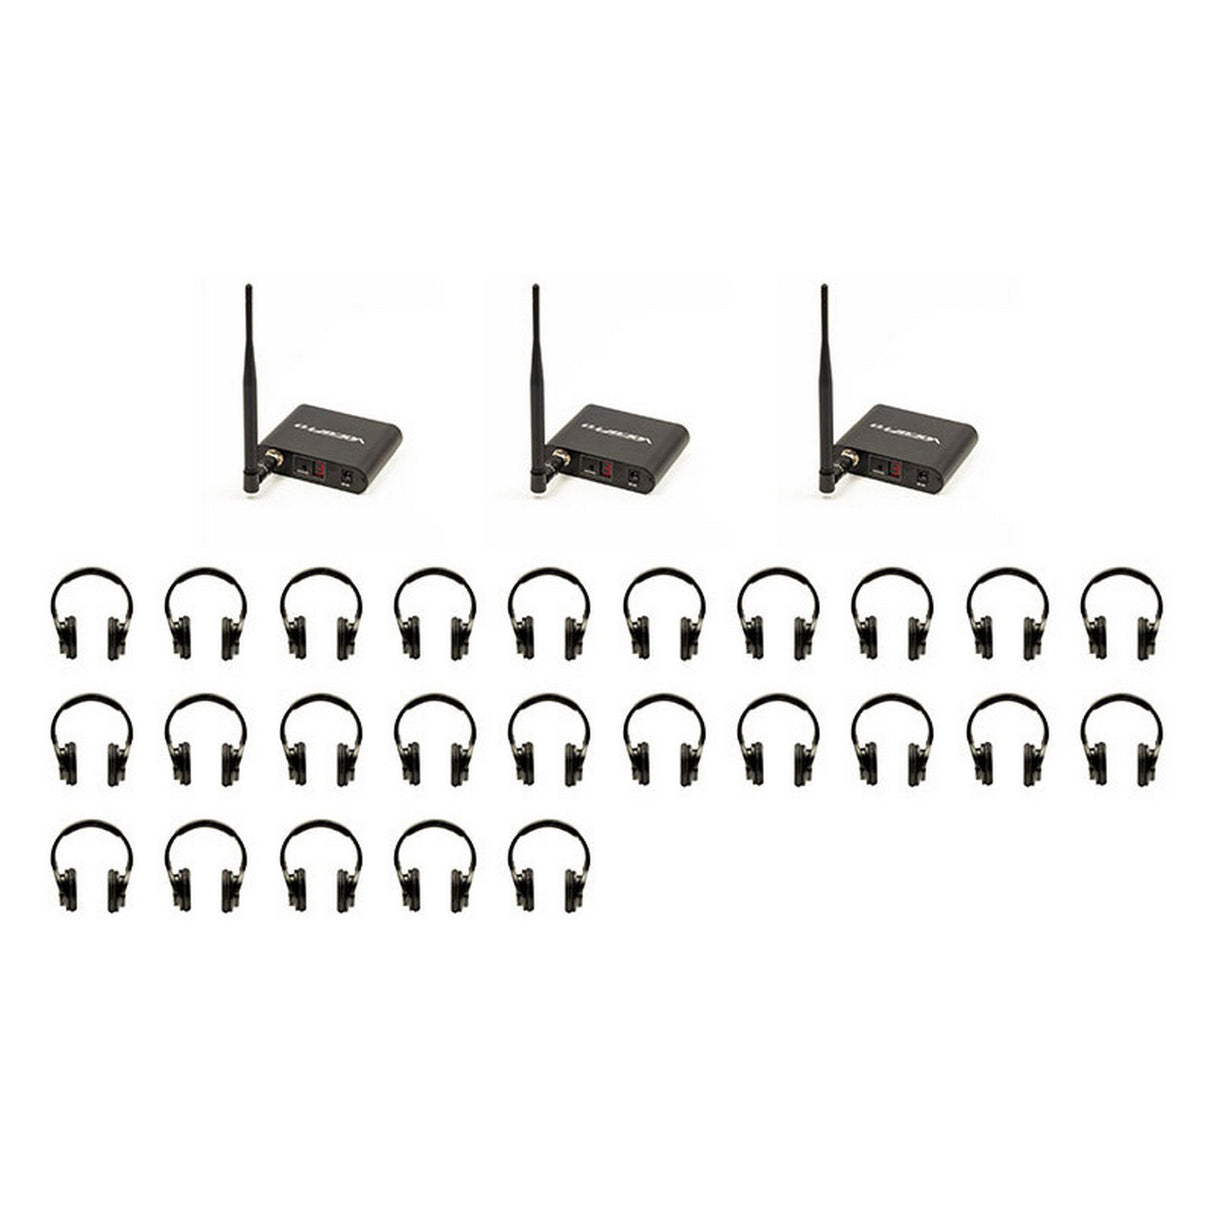 VocoPro Silent Disco 325 Package with 3 Transmitters and 25 Wireless LED Headphones